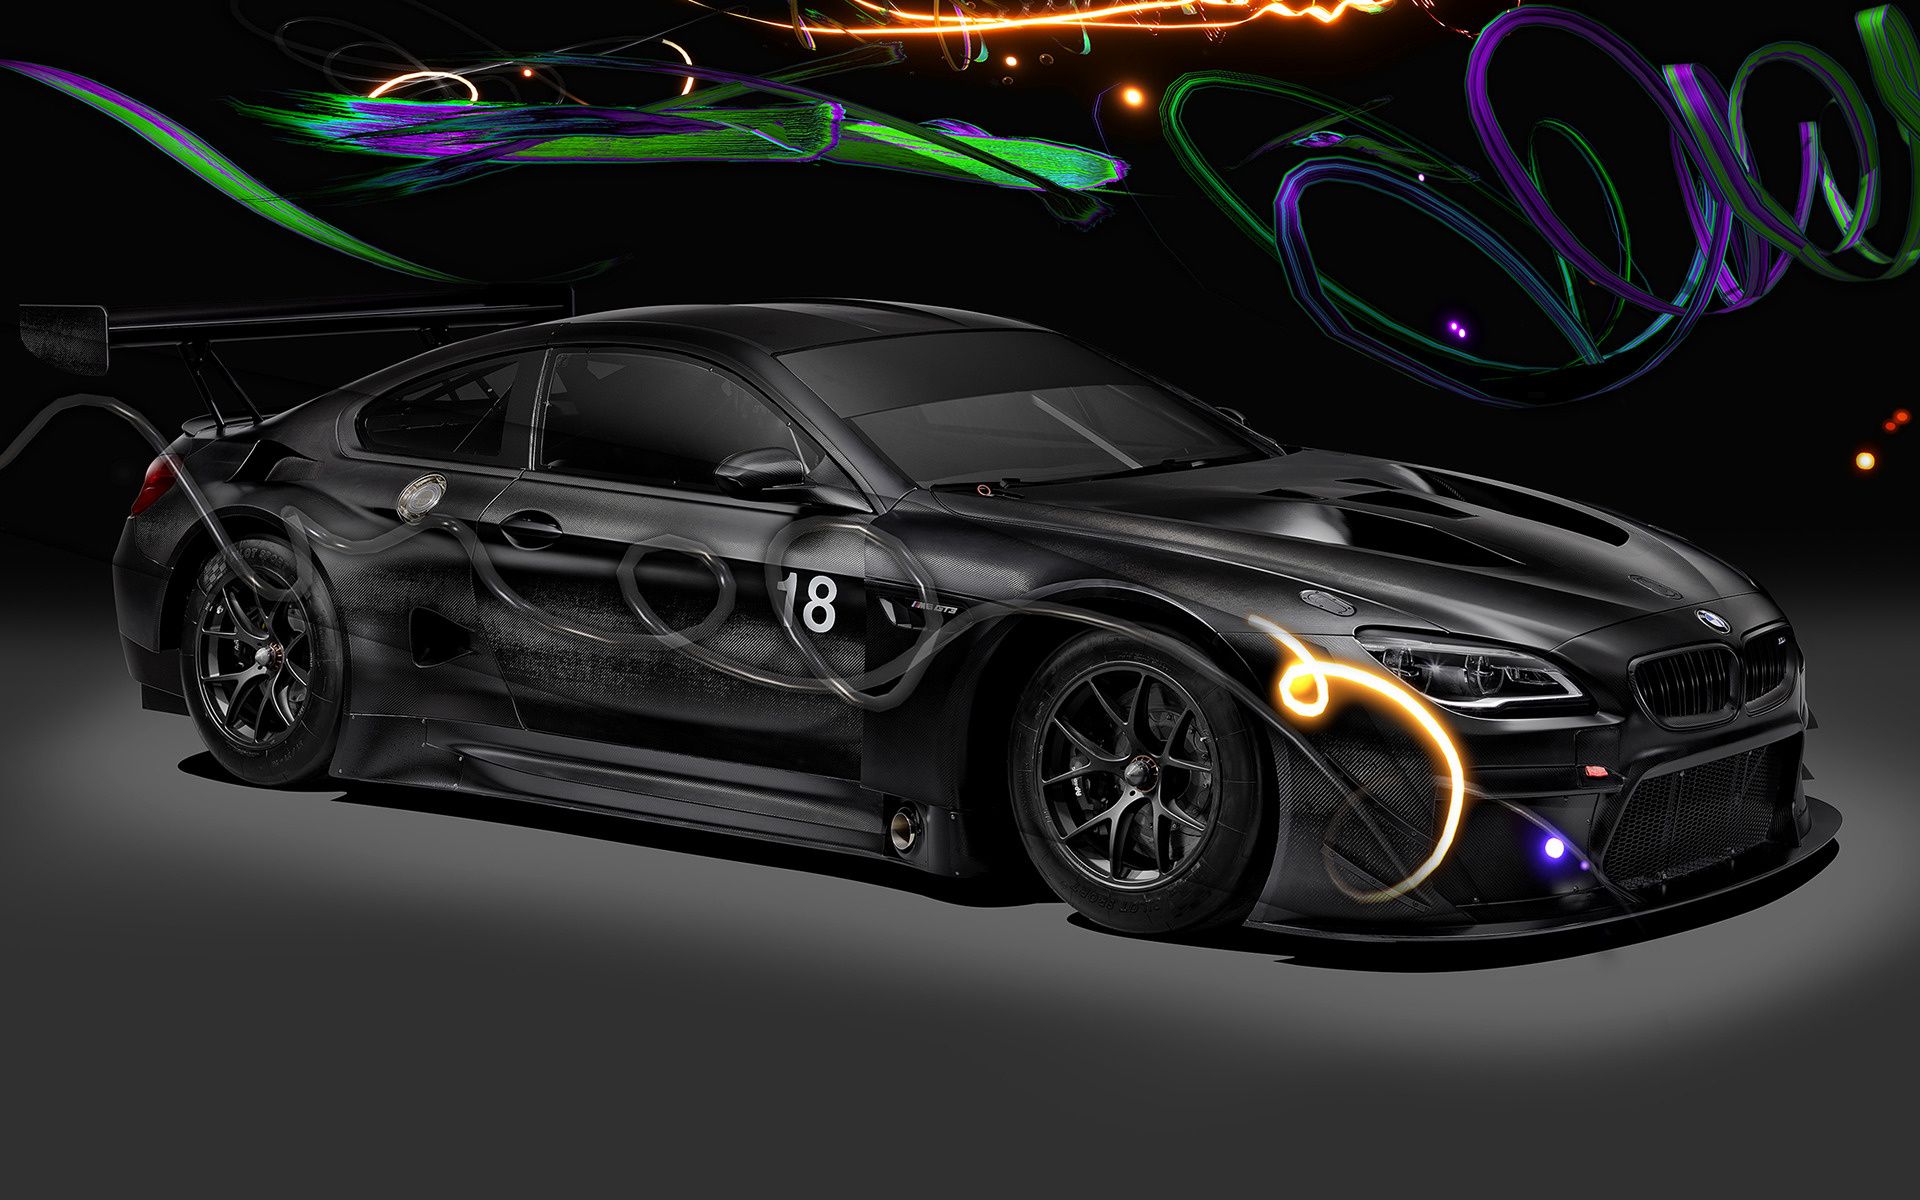 BMW M6 GT3 Art Car by Cao Fei and HD Image